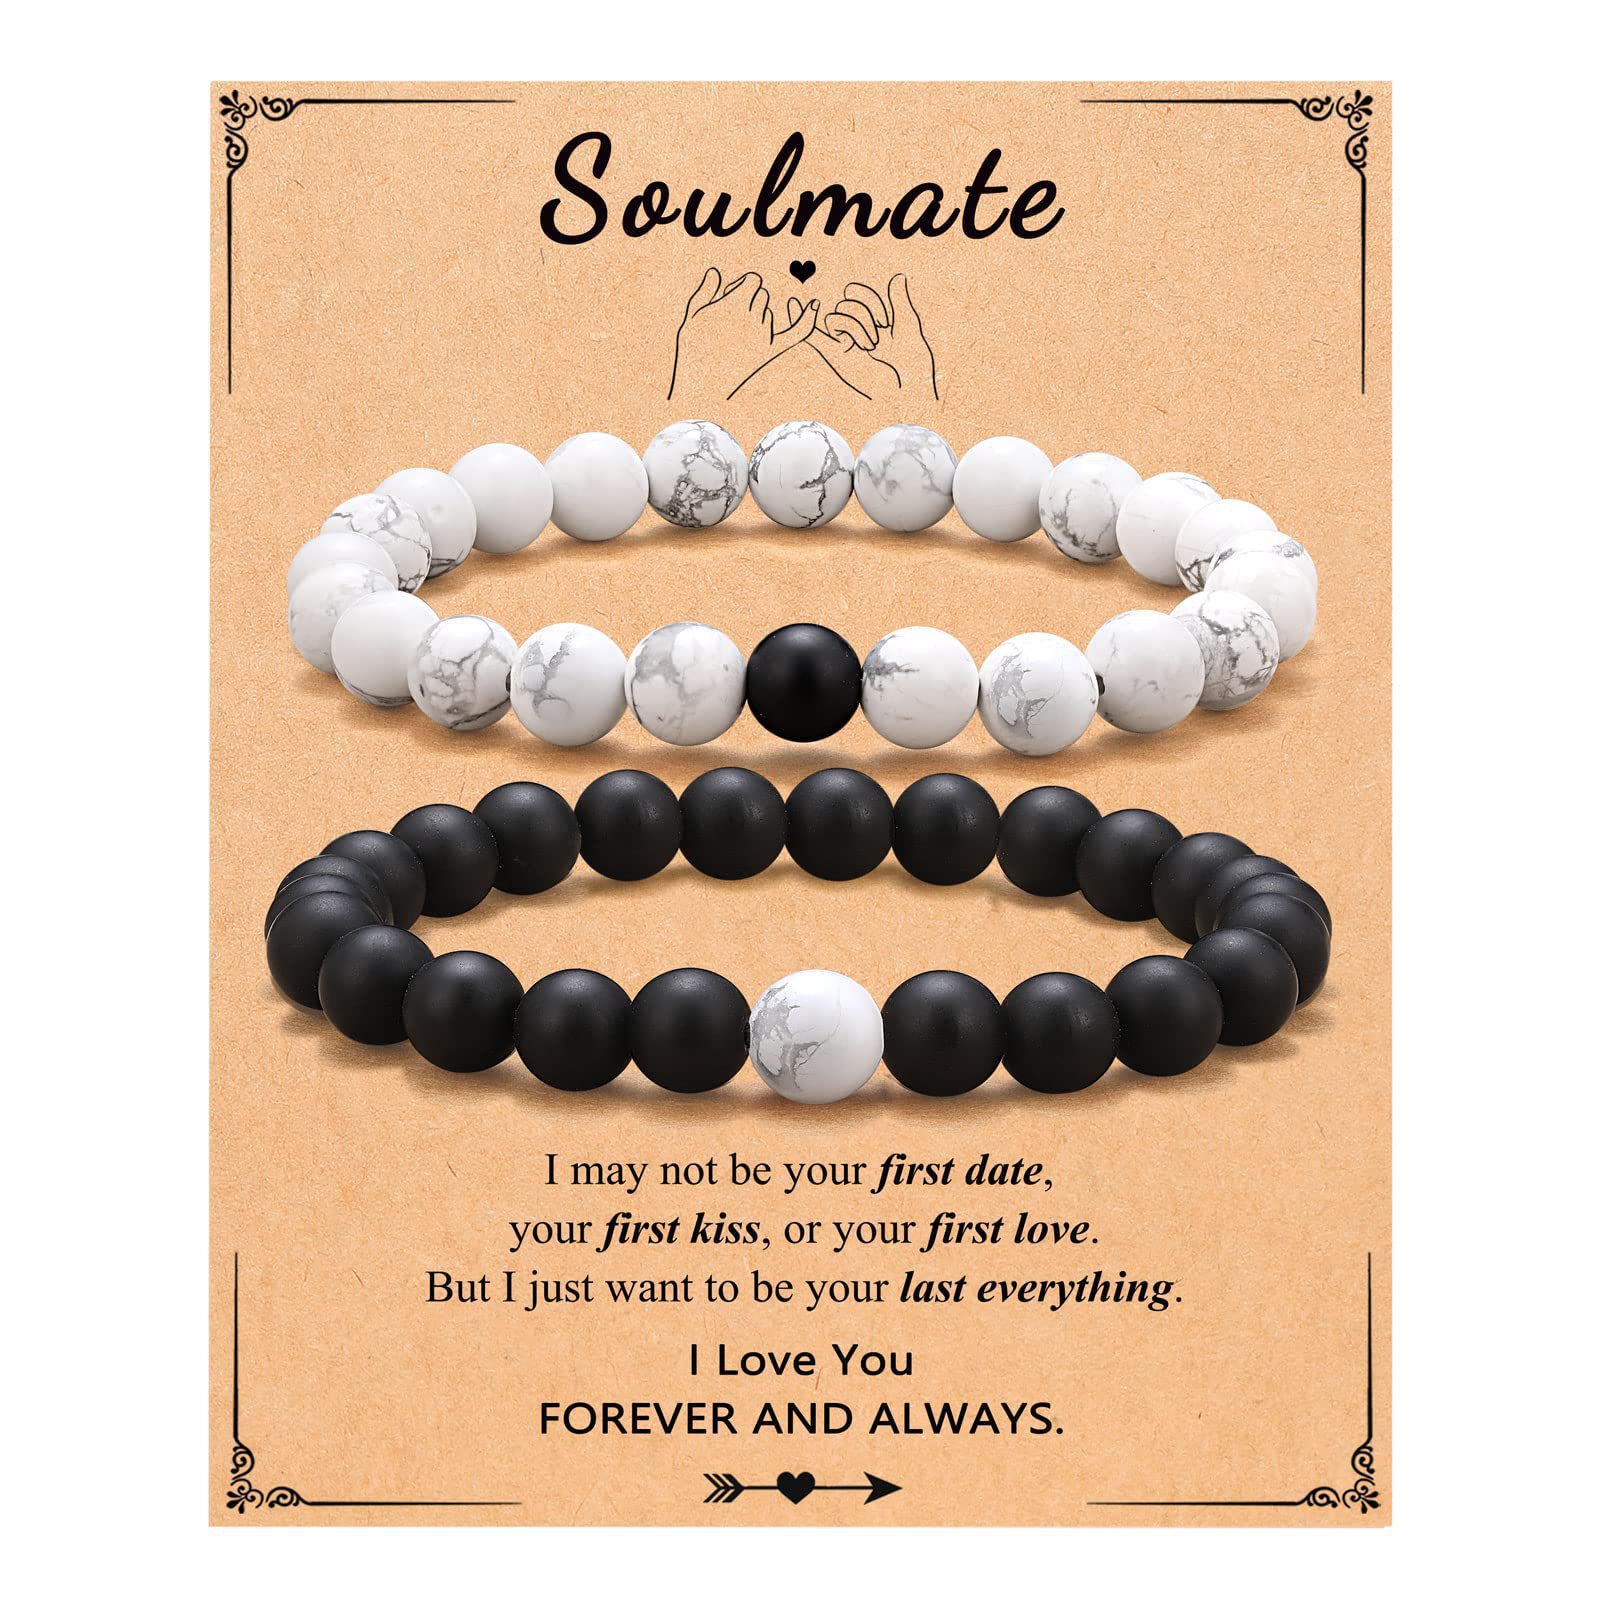 4:Black and white set and Soulmate card